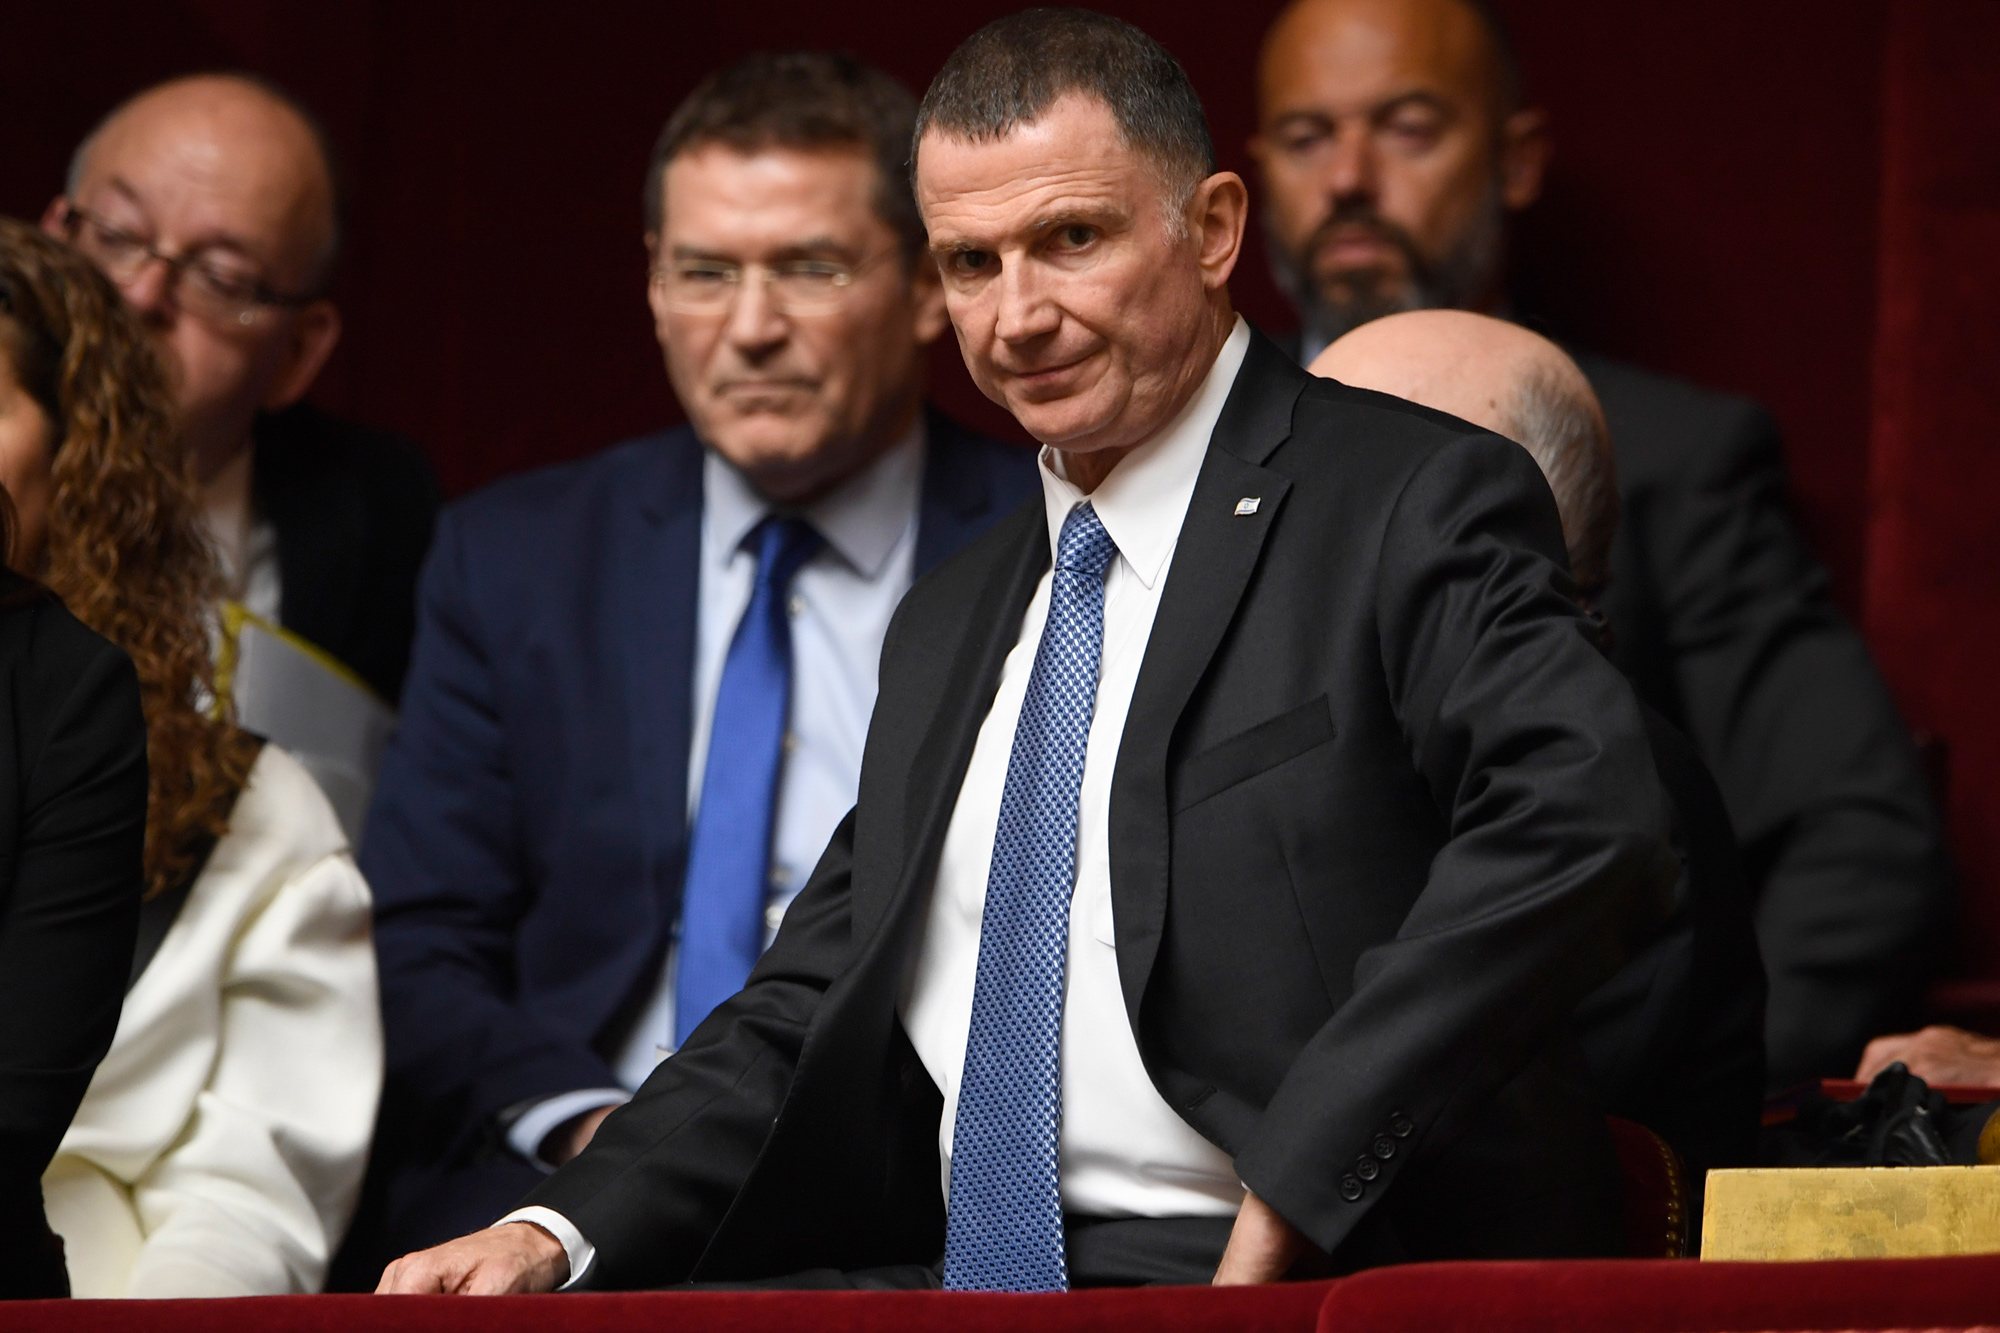 Israel’s Health Minister Yuli Edelstein is seen at the French National Assembly in Paris on May 16, 2018.